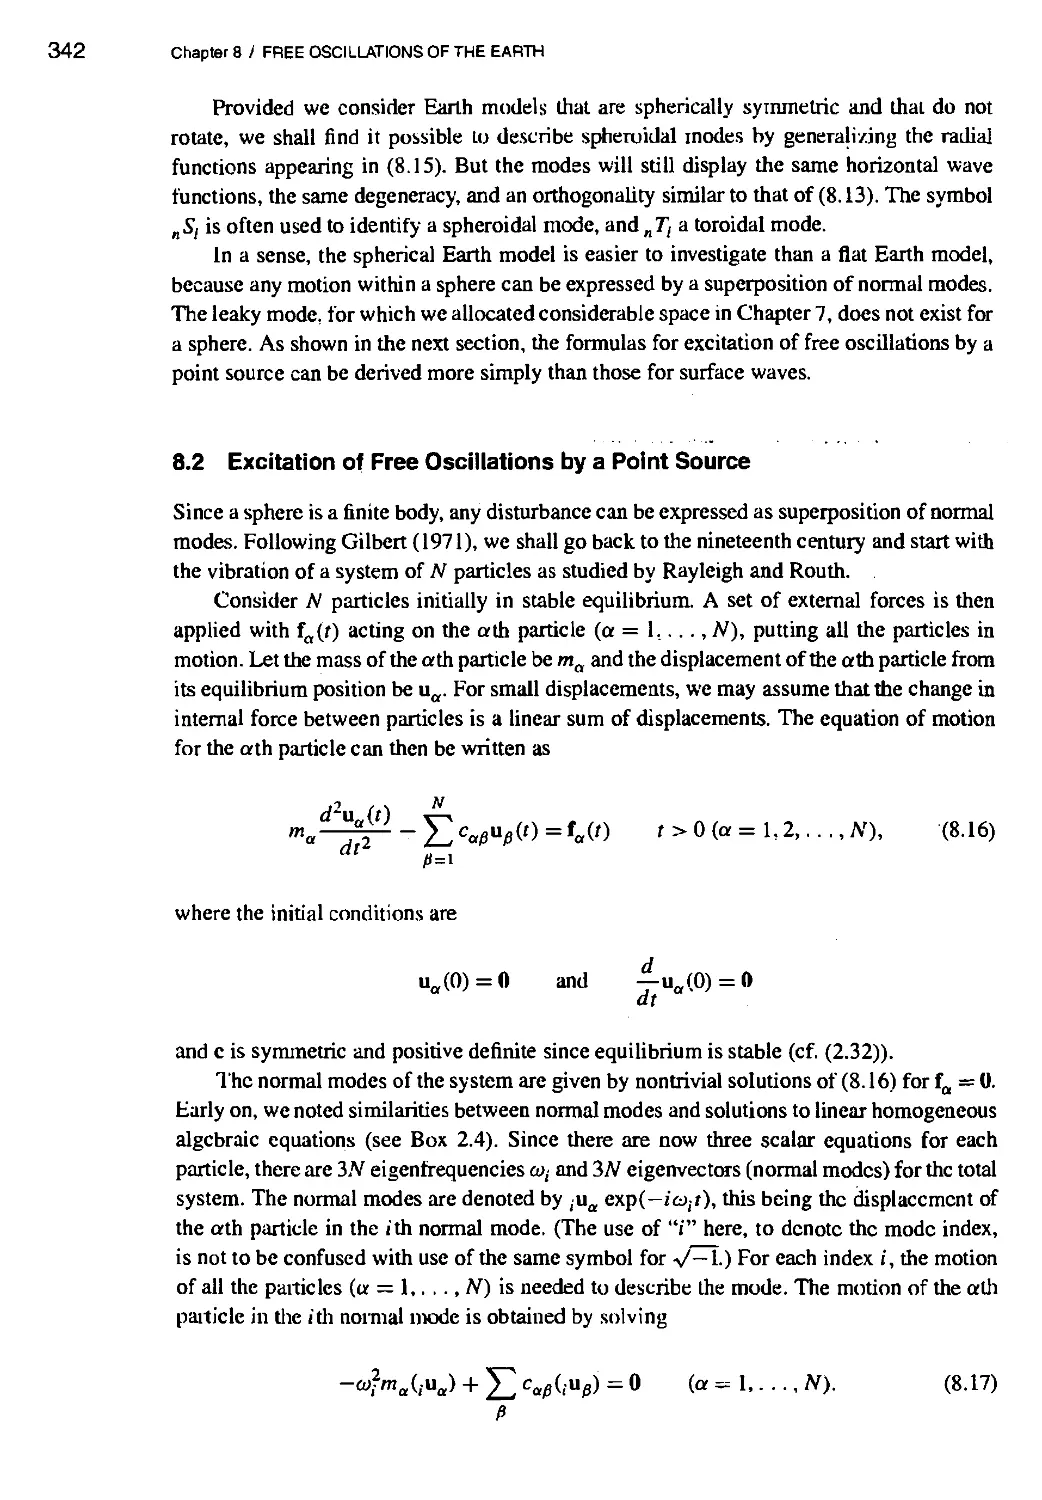 8.2 Excitation of Free Oscillations by a Point Source